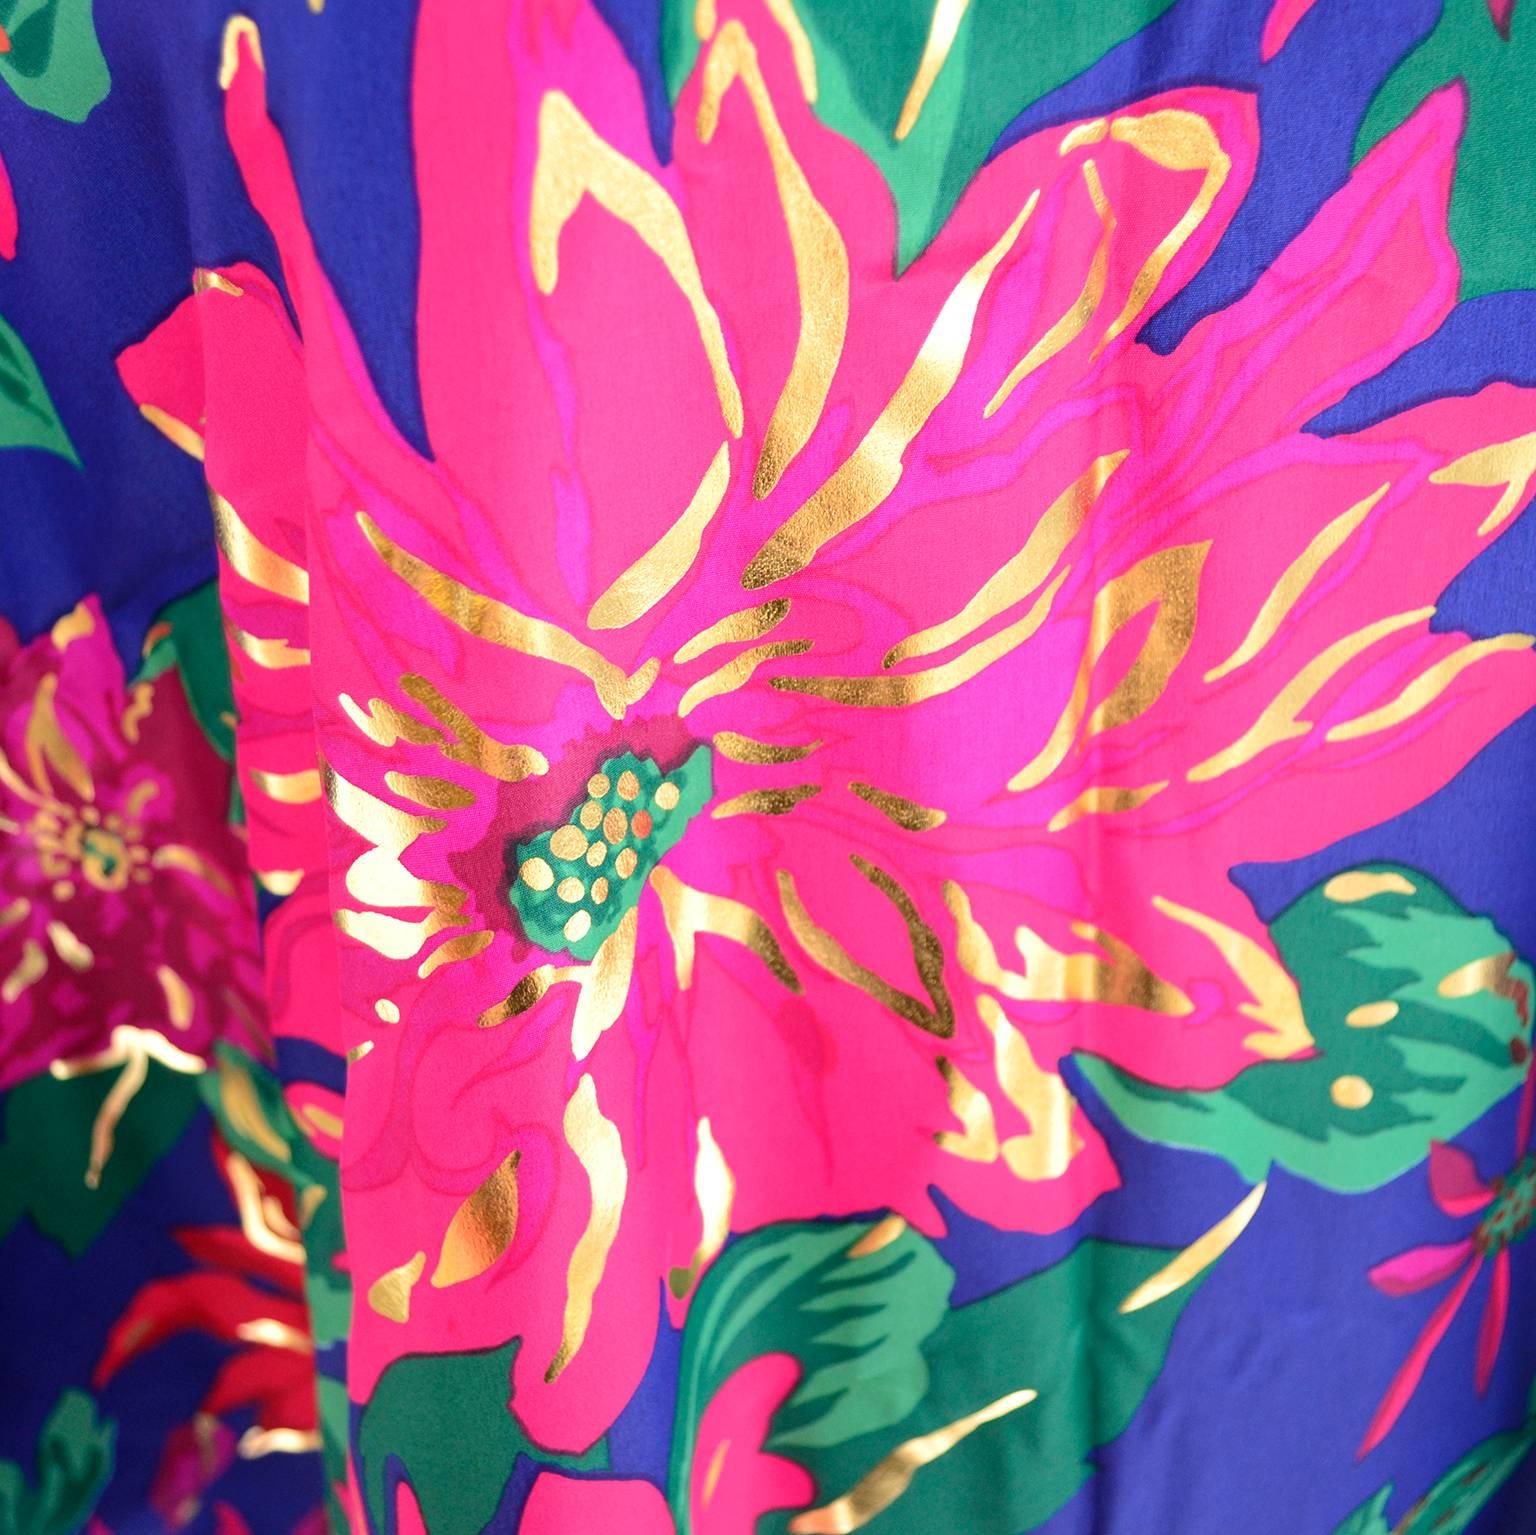 This bright floral vintage caftan was designed by Oscar de la Renta for Swirl in the 1980's and was made in the USA of imported fabric. This beautiful statement piece appears to have never been worn and measures 80 inches in circumference around the